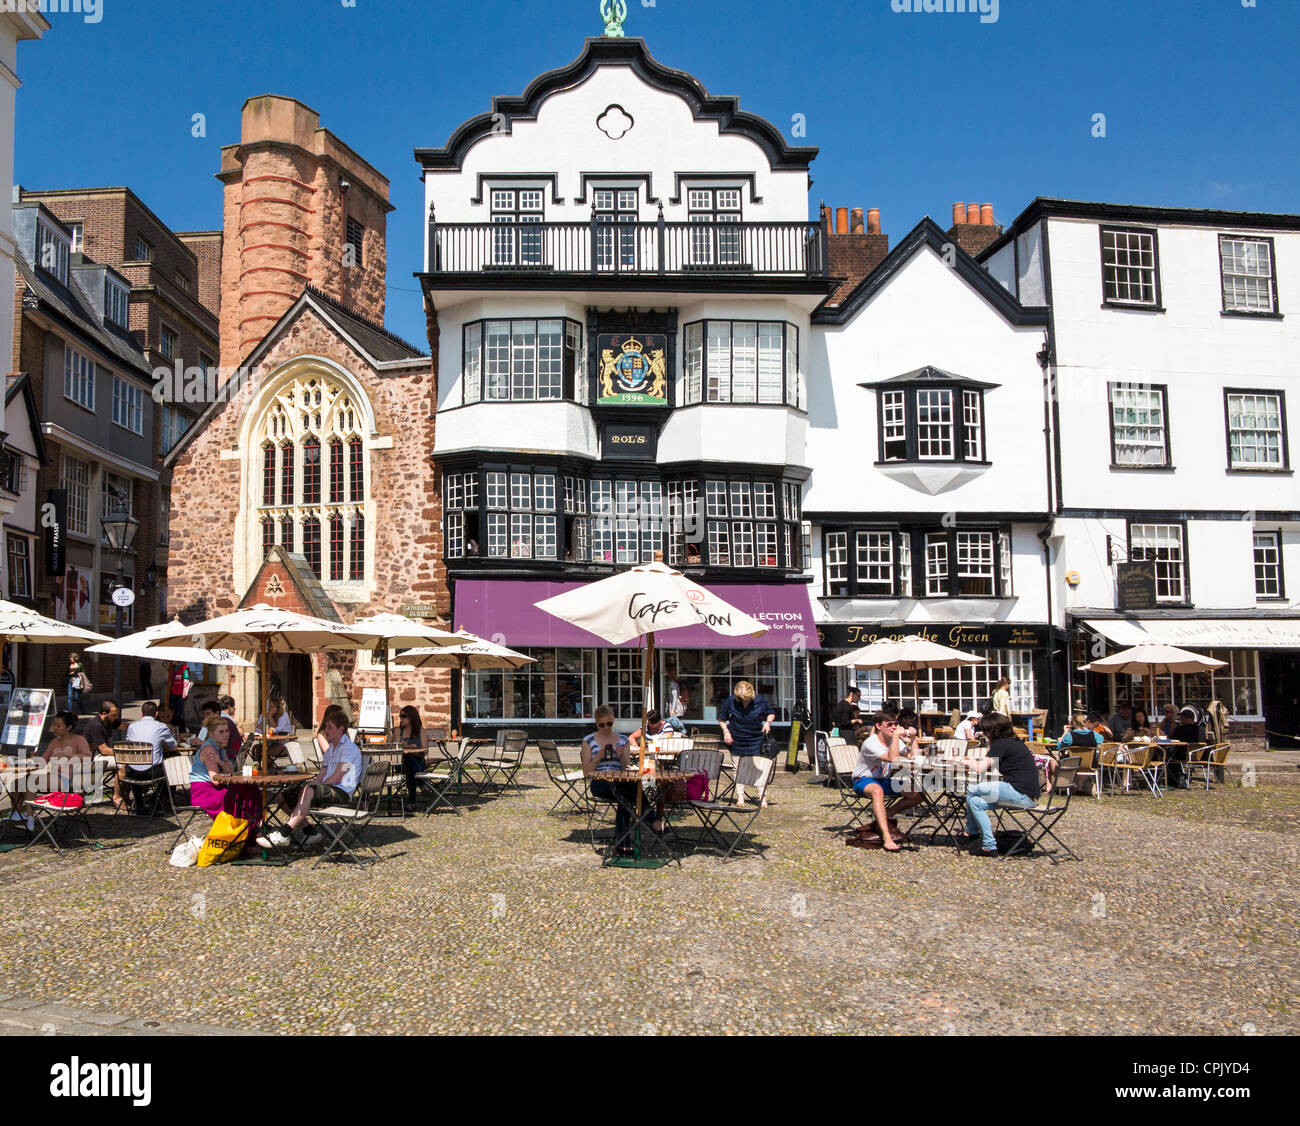 Exeter Cathedral Yard showing Mol's Coffee House and outdoor cafe seating Stock Photo